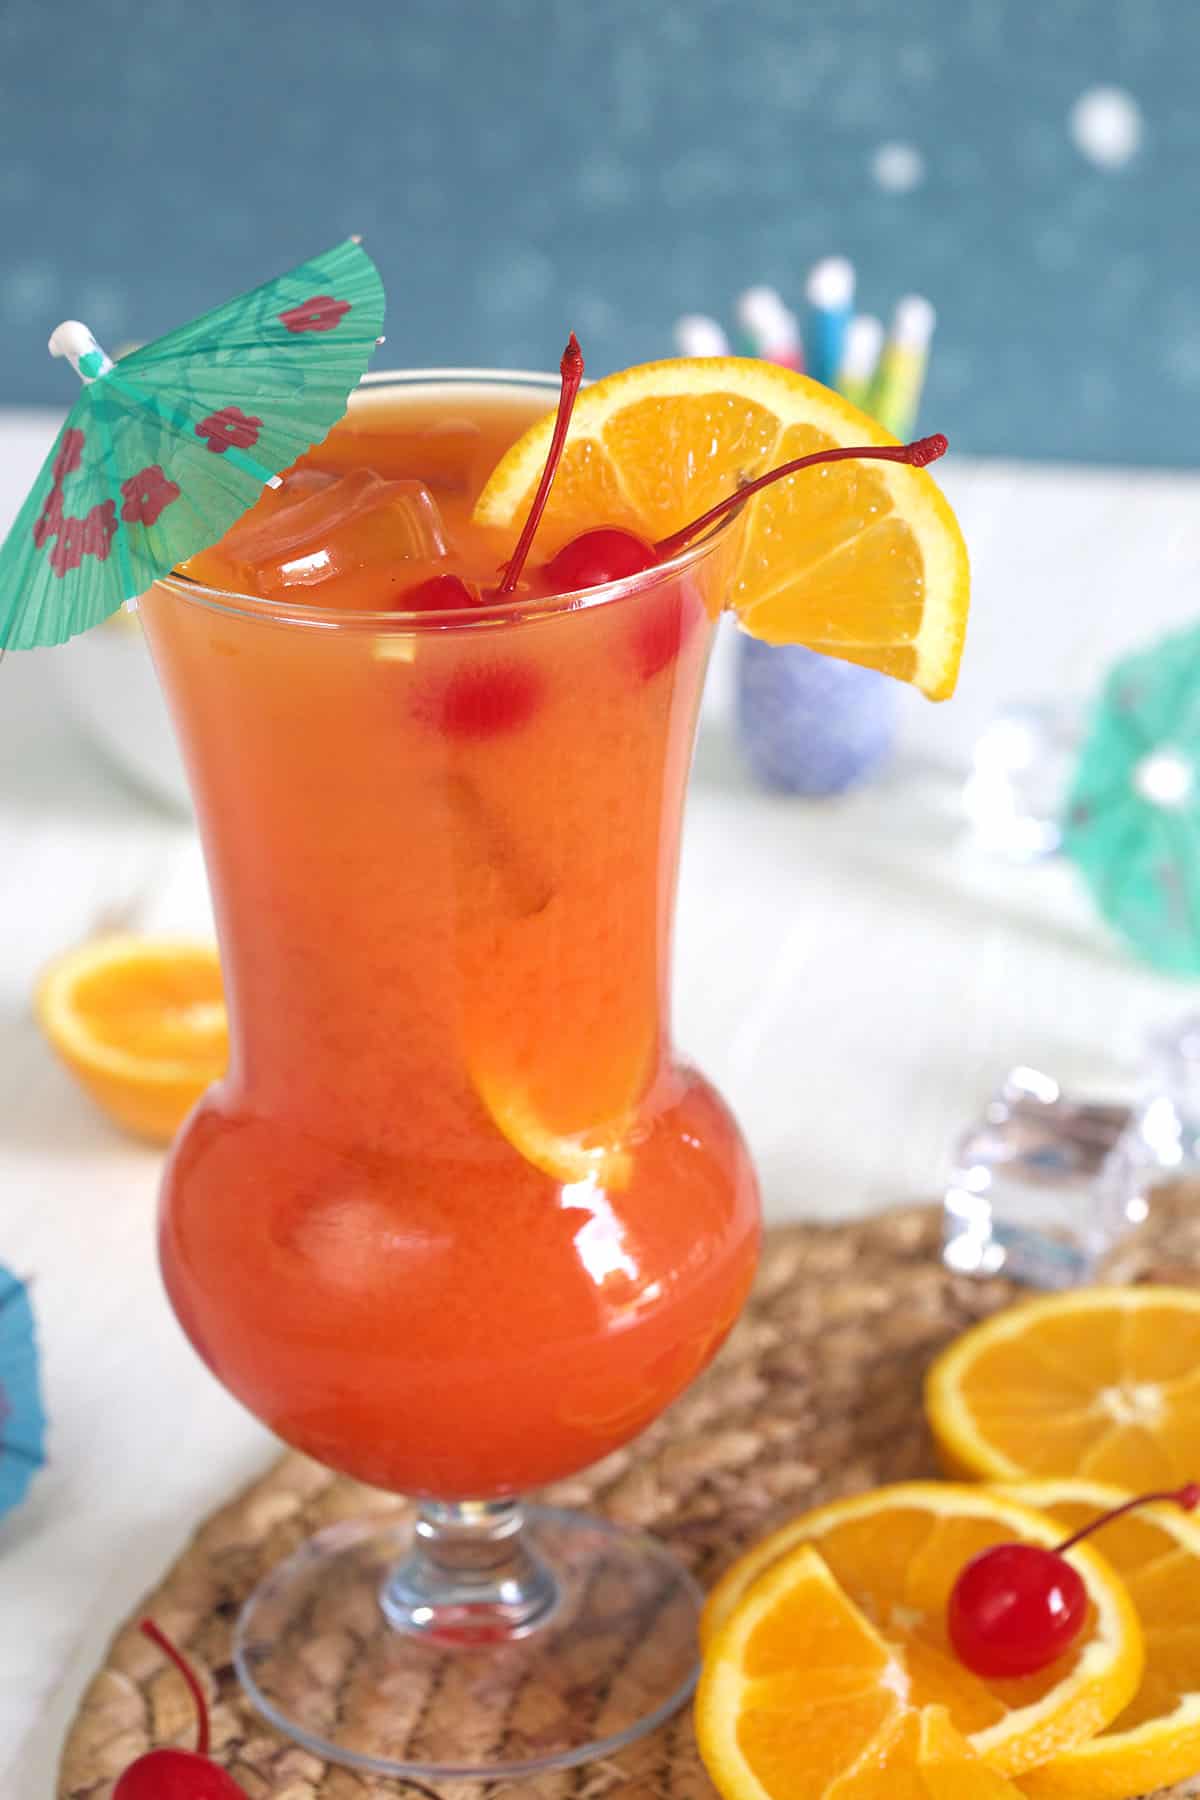 Several orange slices are placed next to a full hurricane glass.